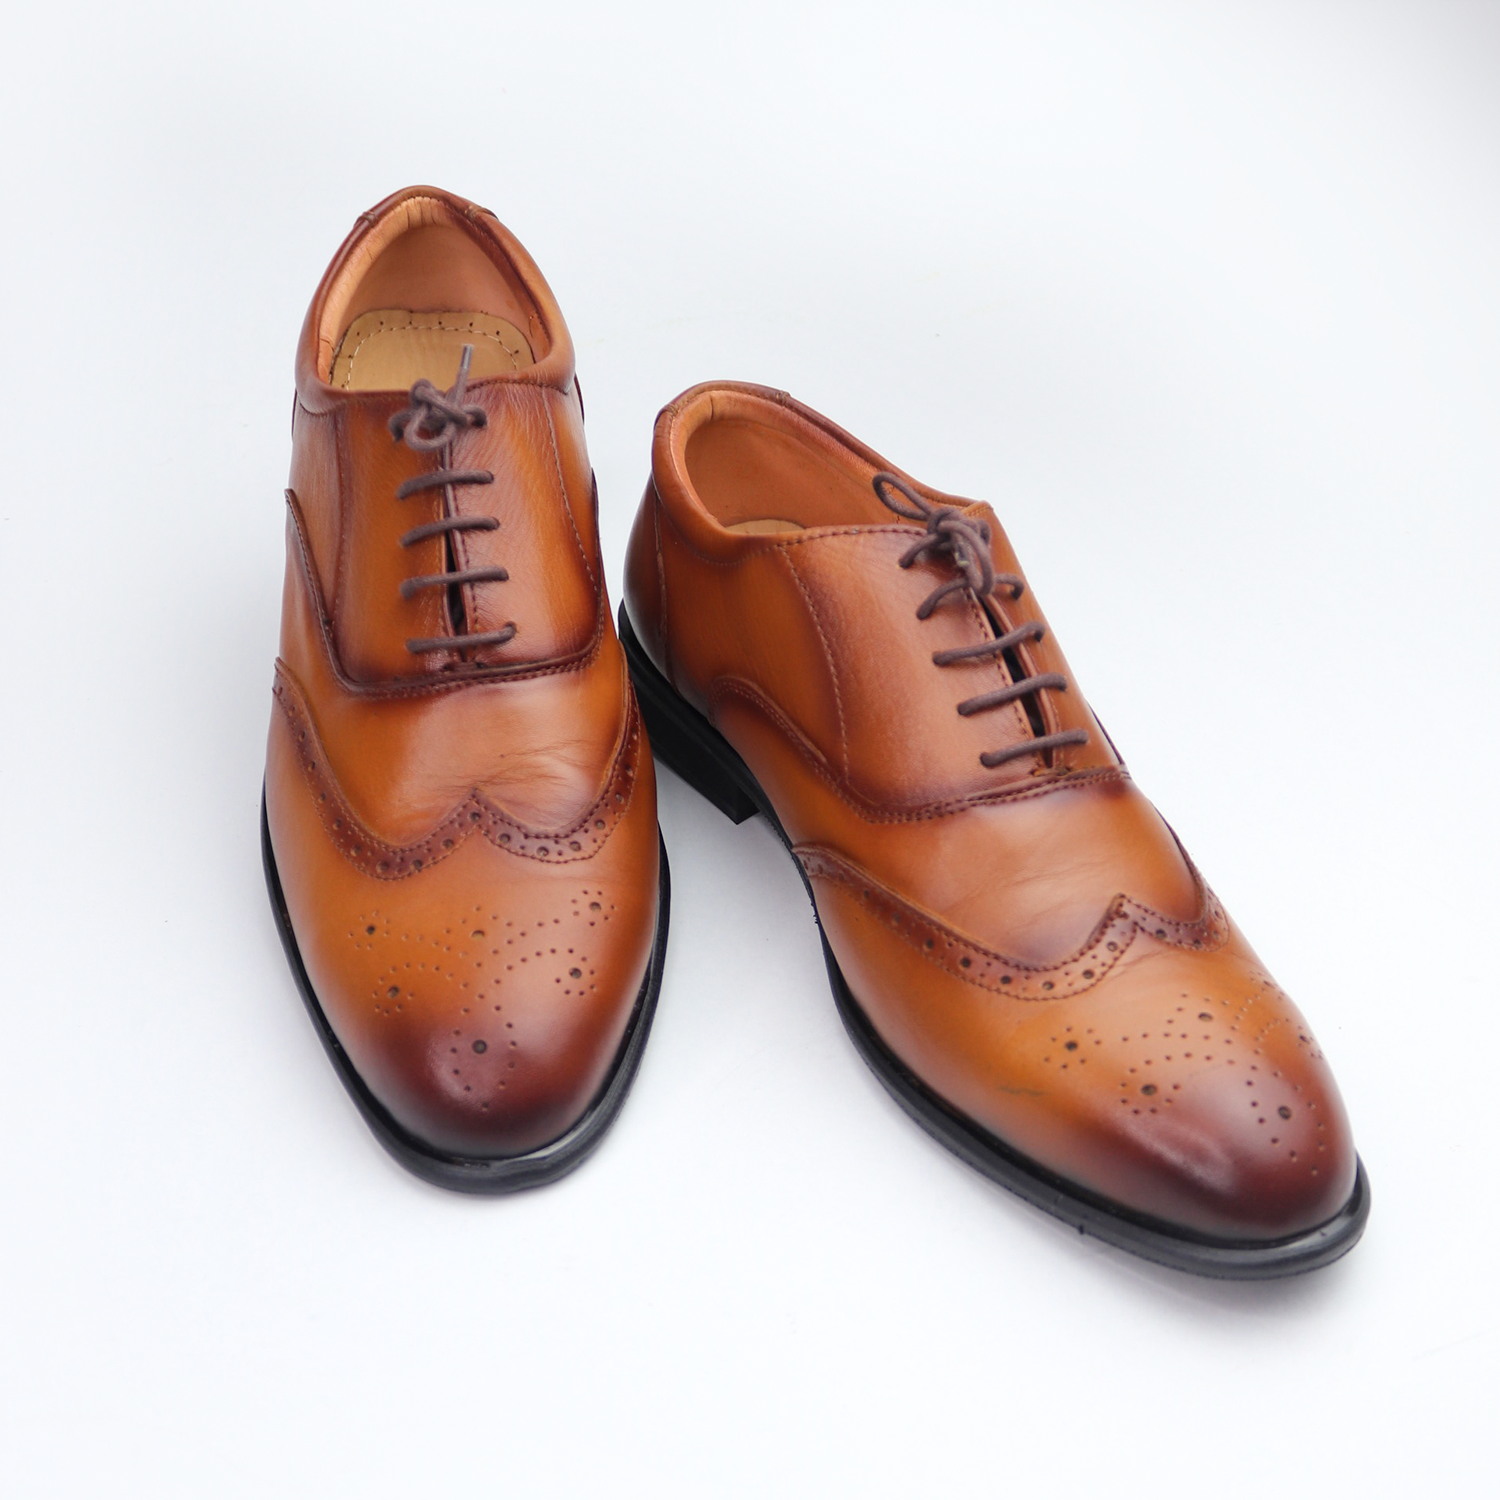 Men's Handmade Leather Business Formal Shoes